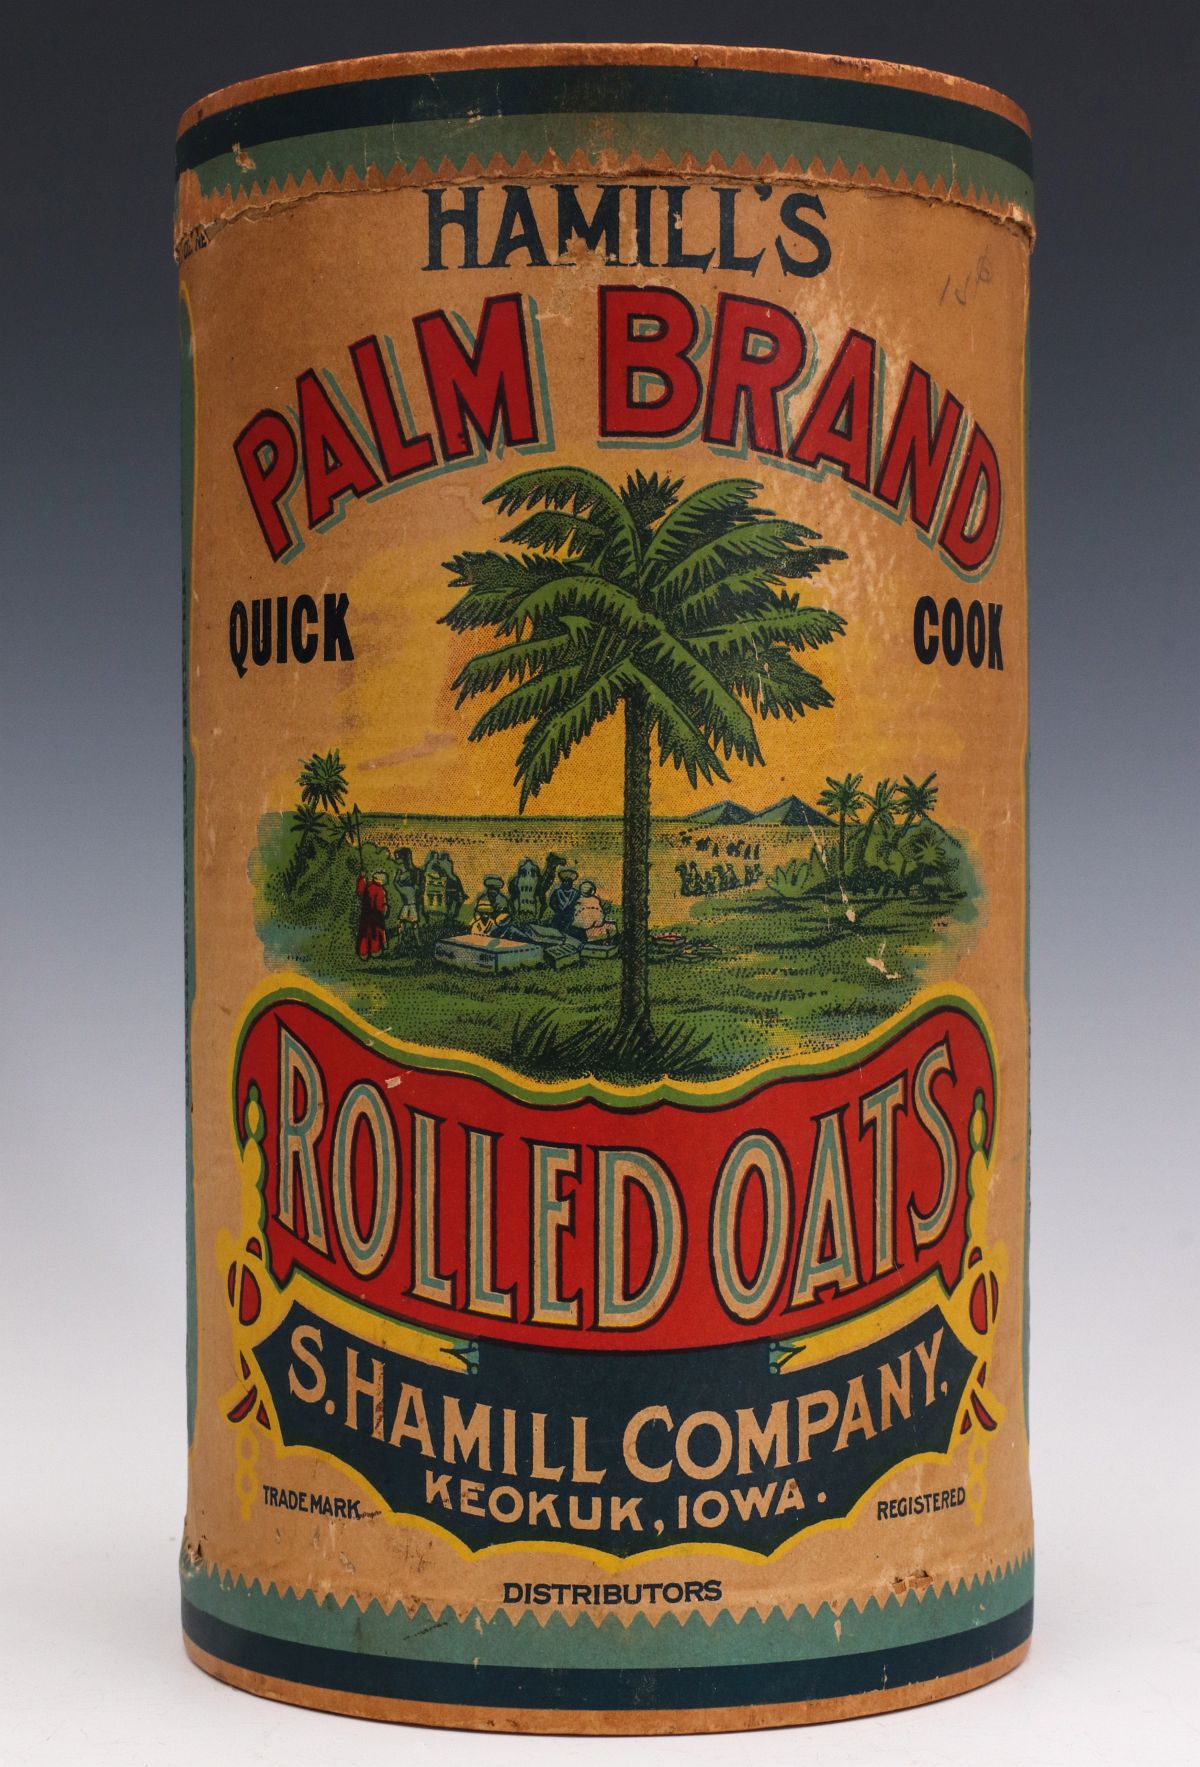 A HAMILL'S PALM BRAND ROLLED OATS CONTAINER